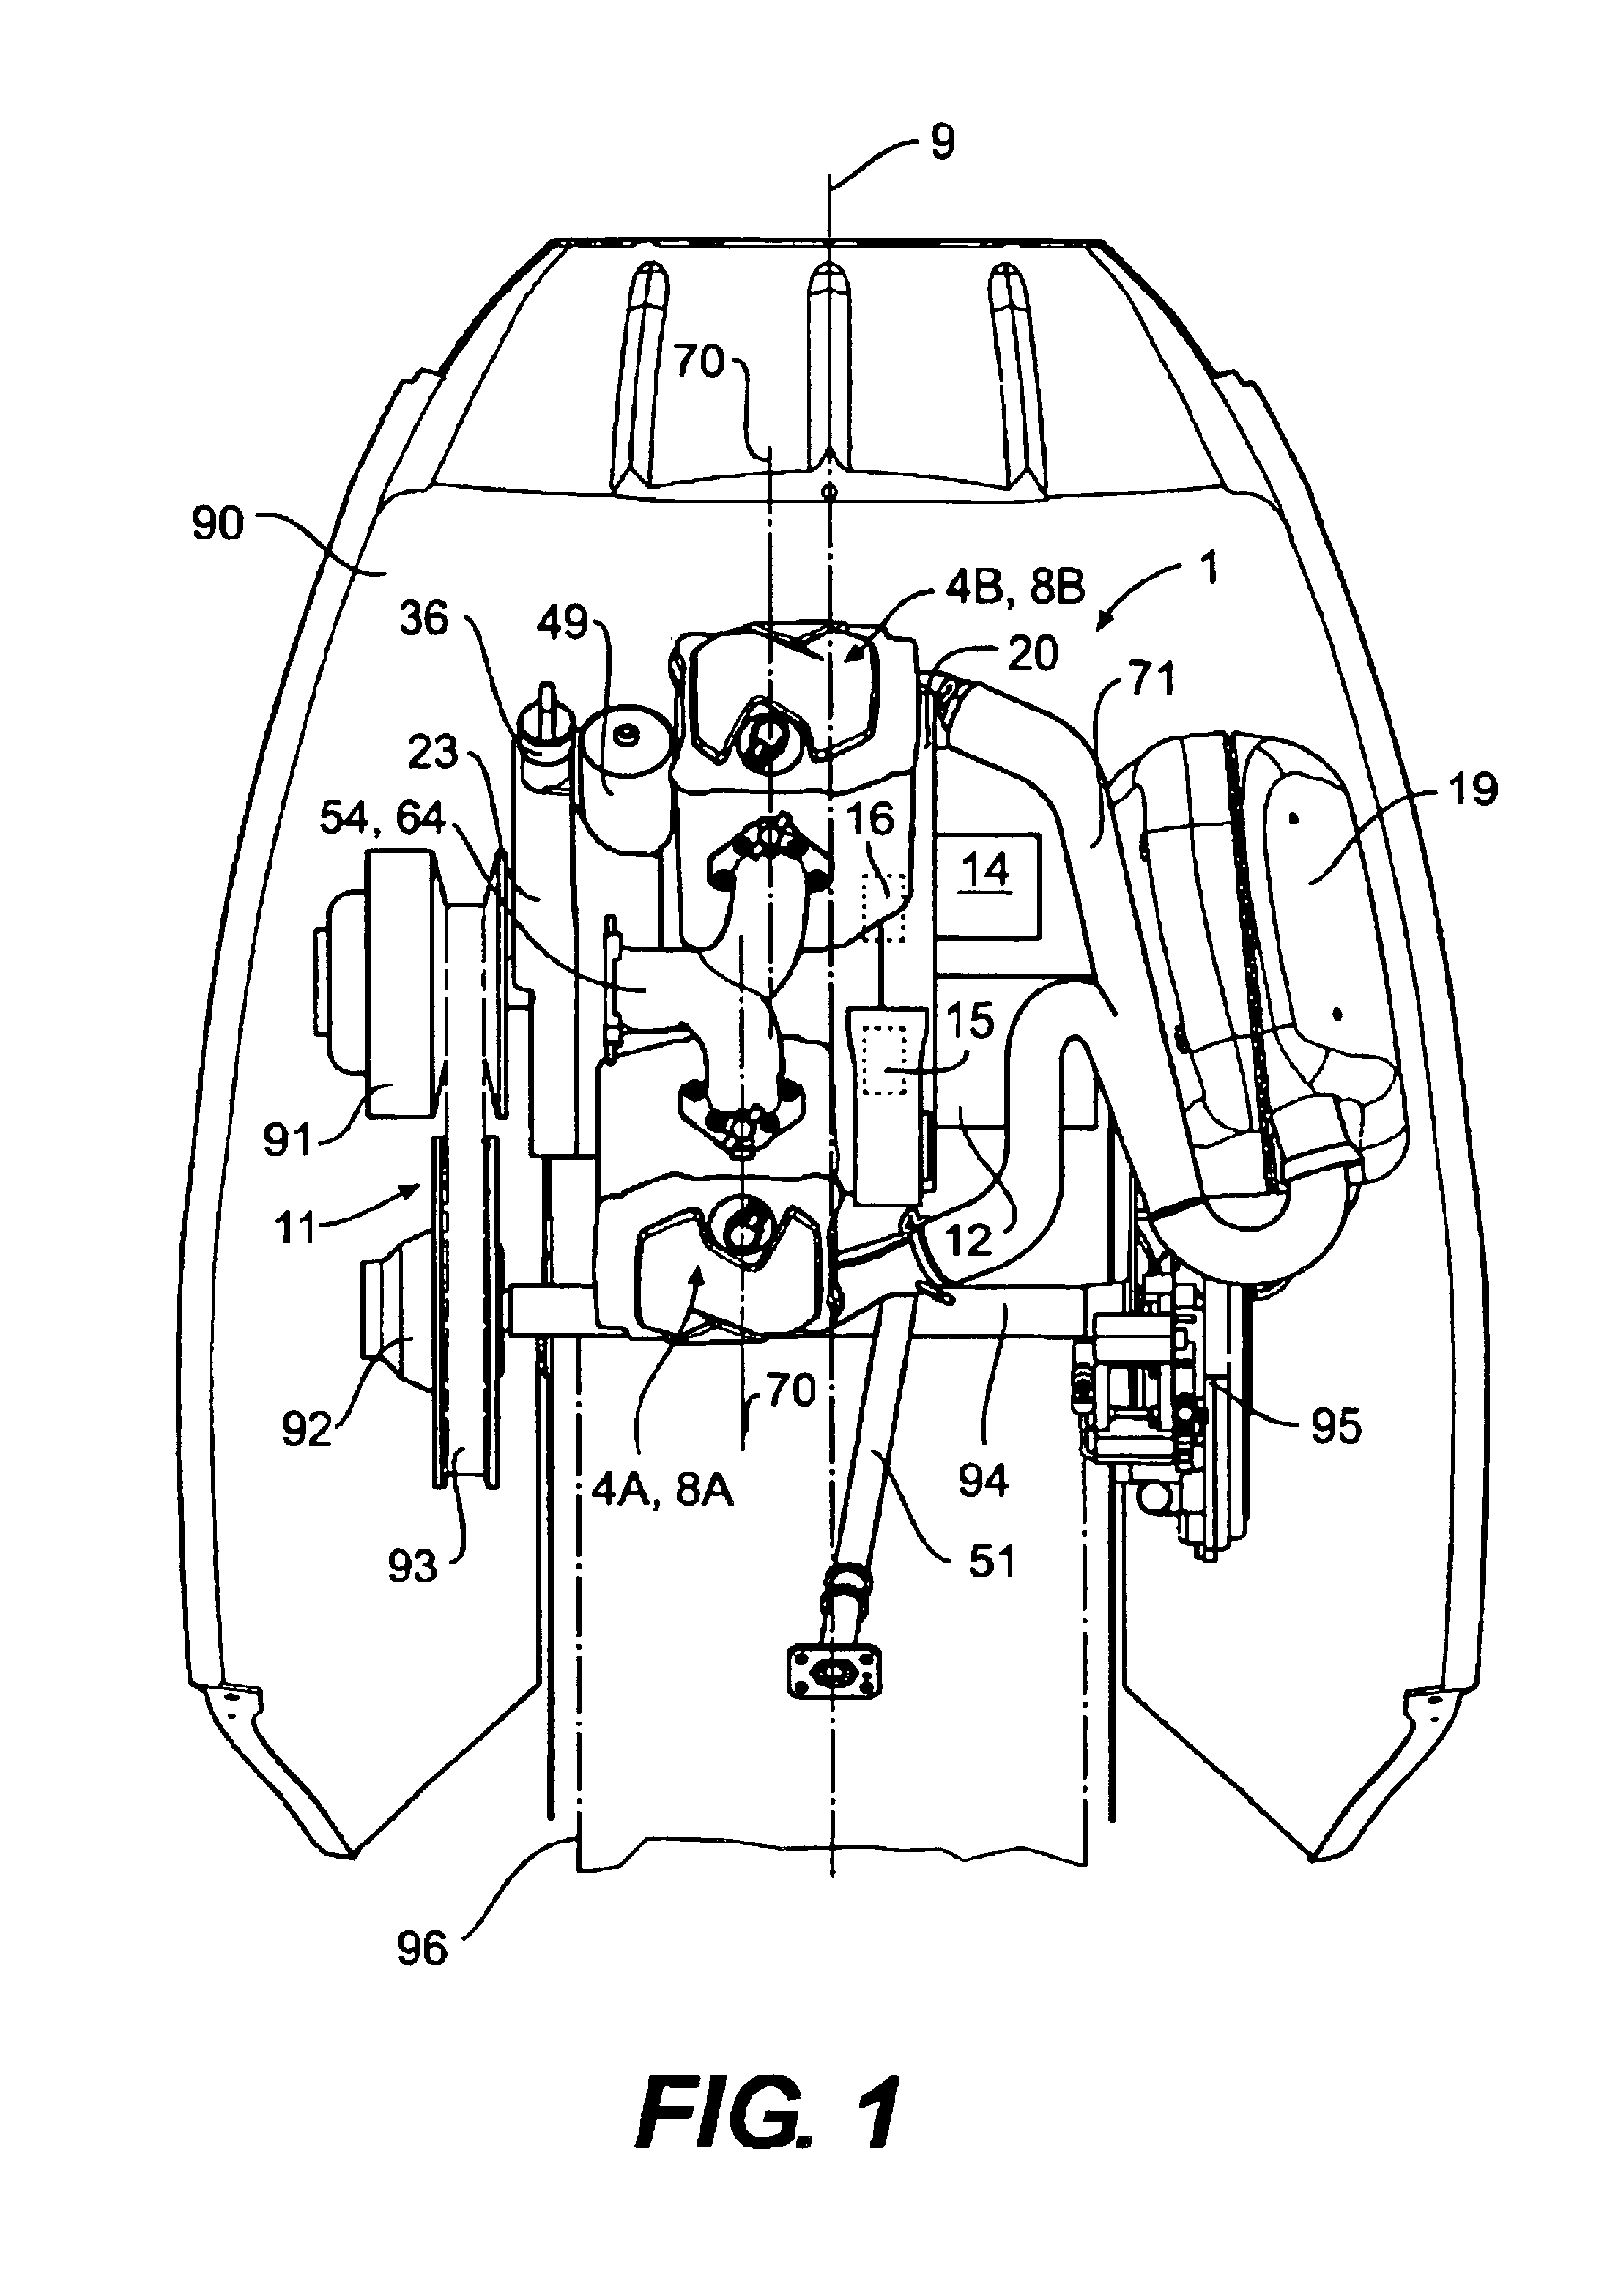 Engine arrangement for a four cycle engine